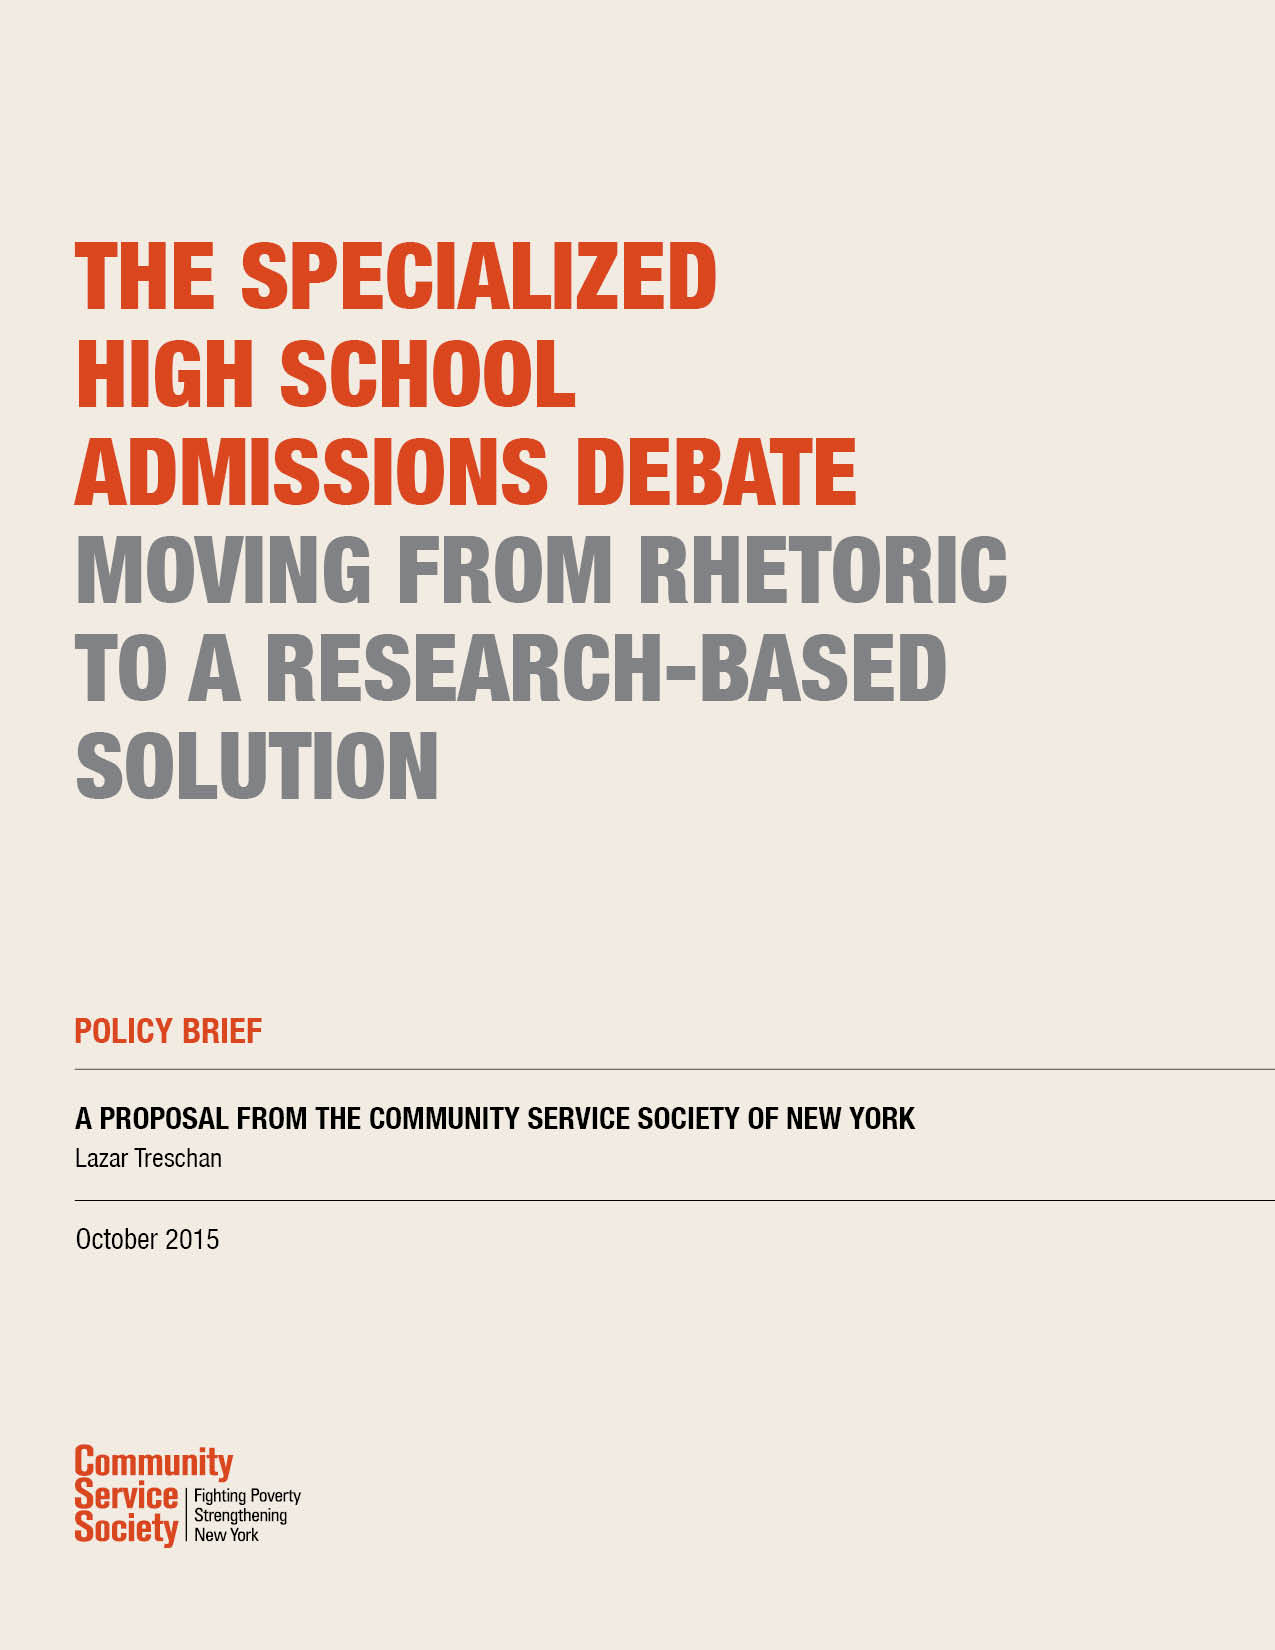 The Specialized High School Admissions Debate: Moving From Rhetoric to a Research-Based Solution